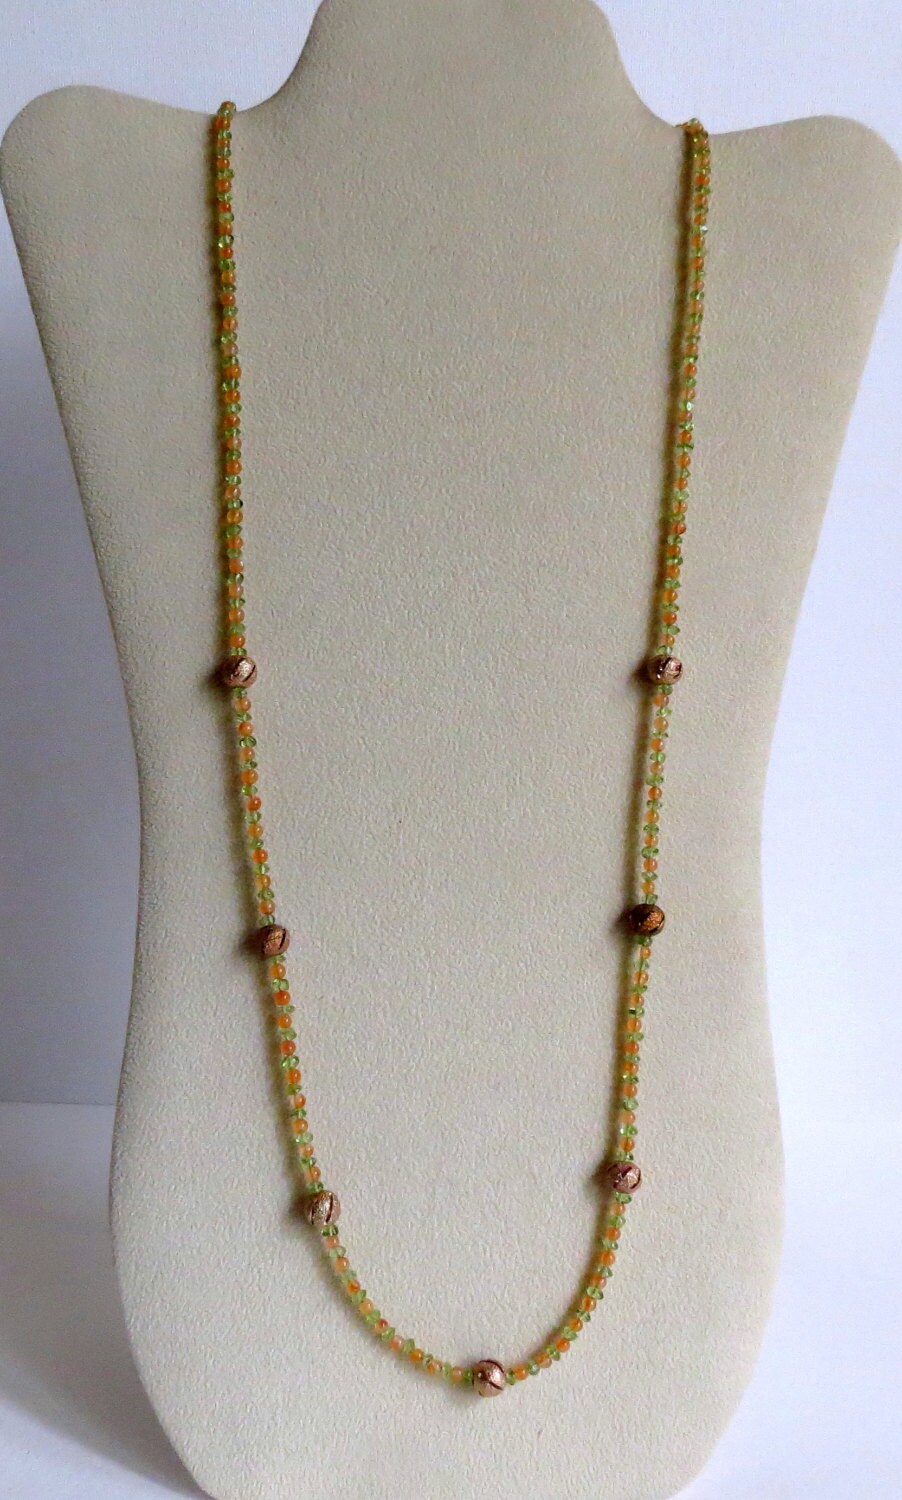 Peridot Necklace With Citrion and Oxidized Copper Beads - Etsy